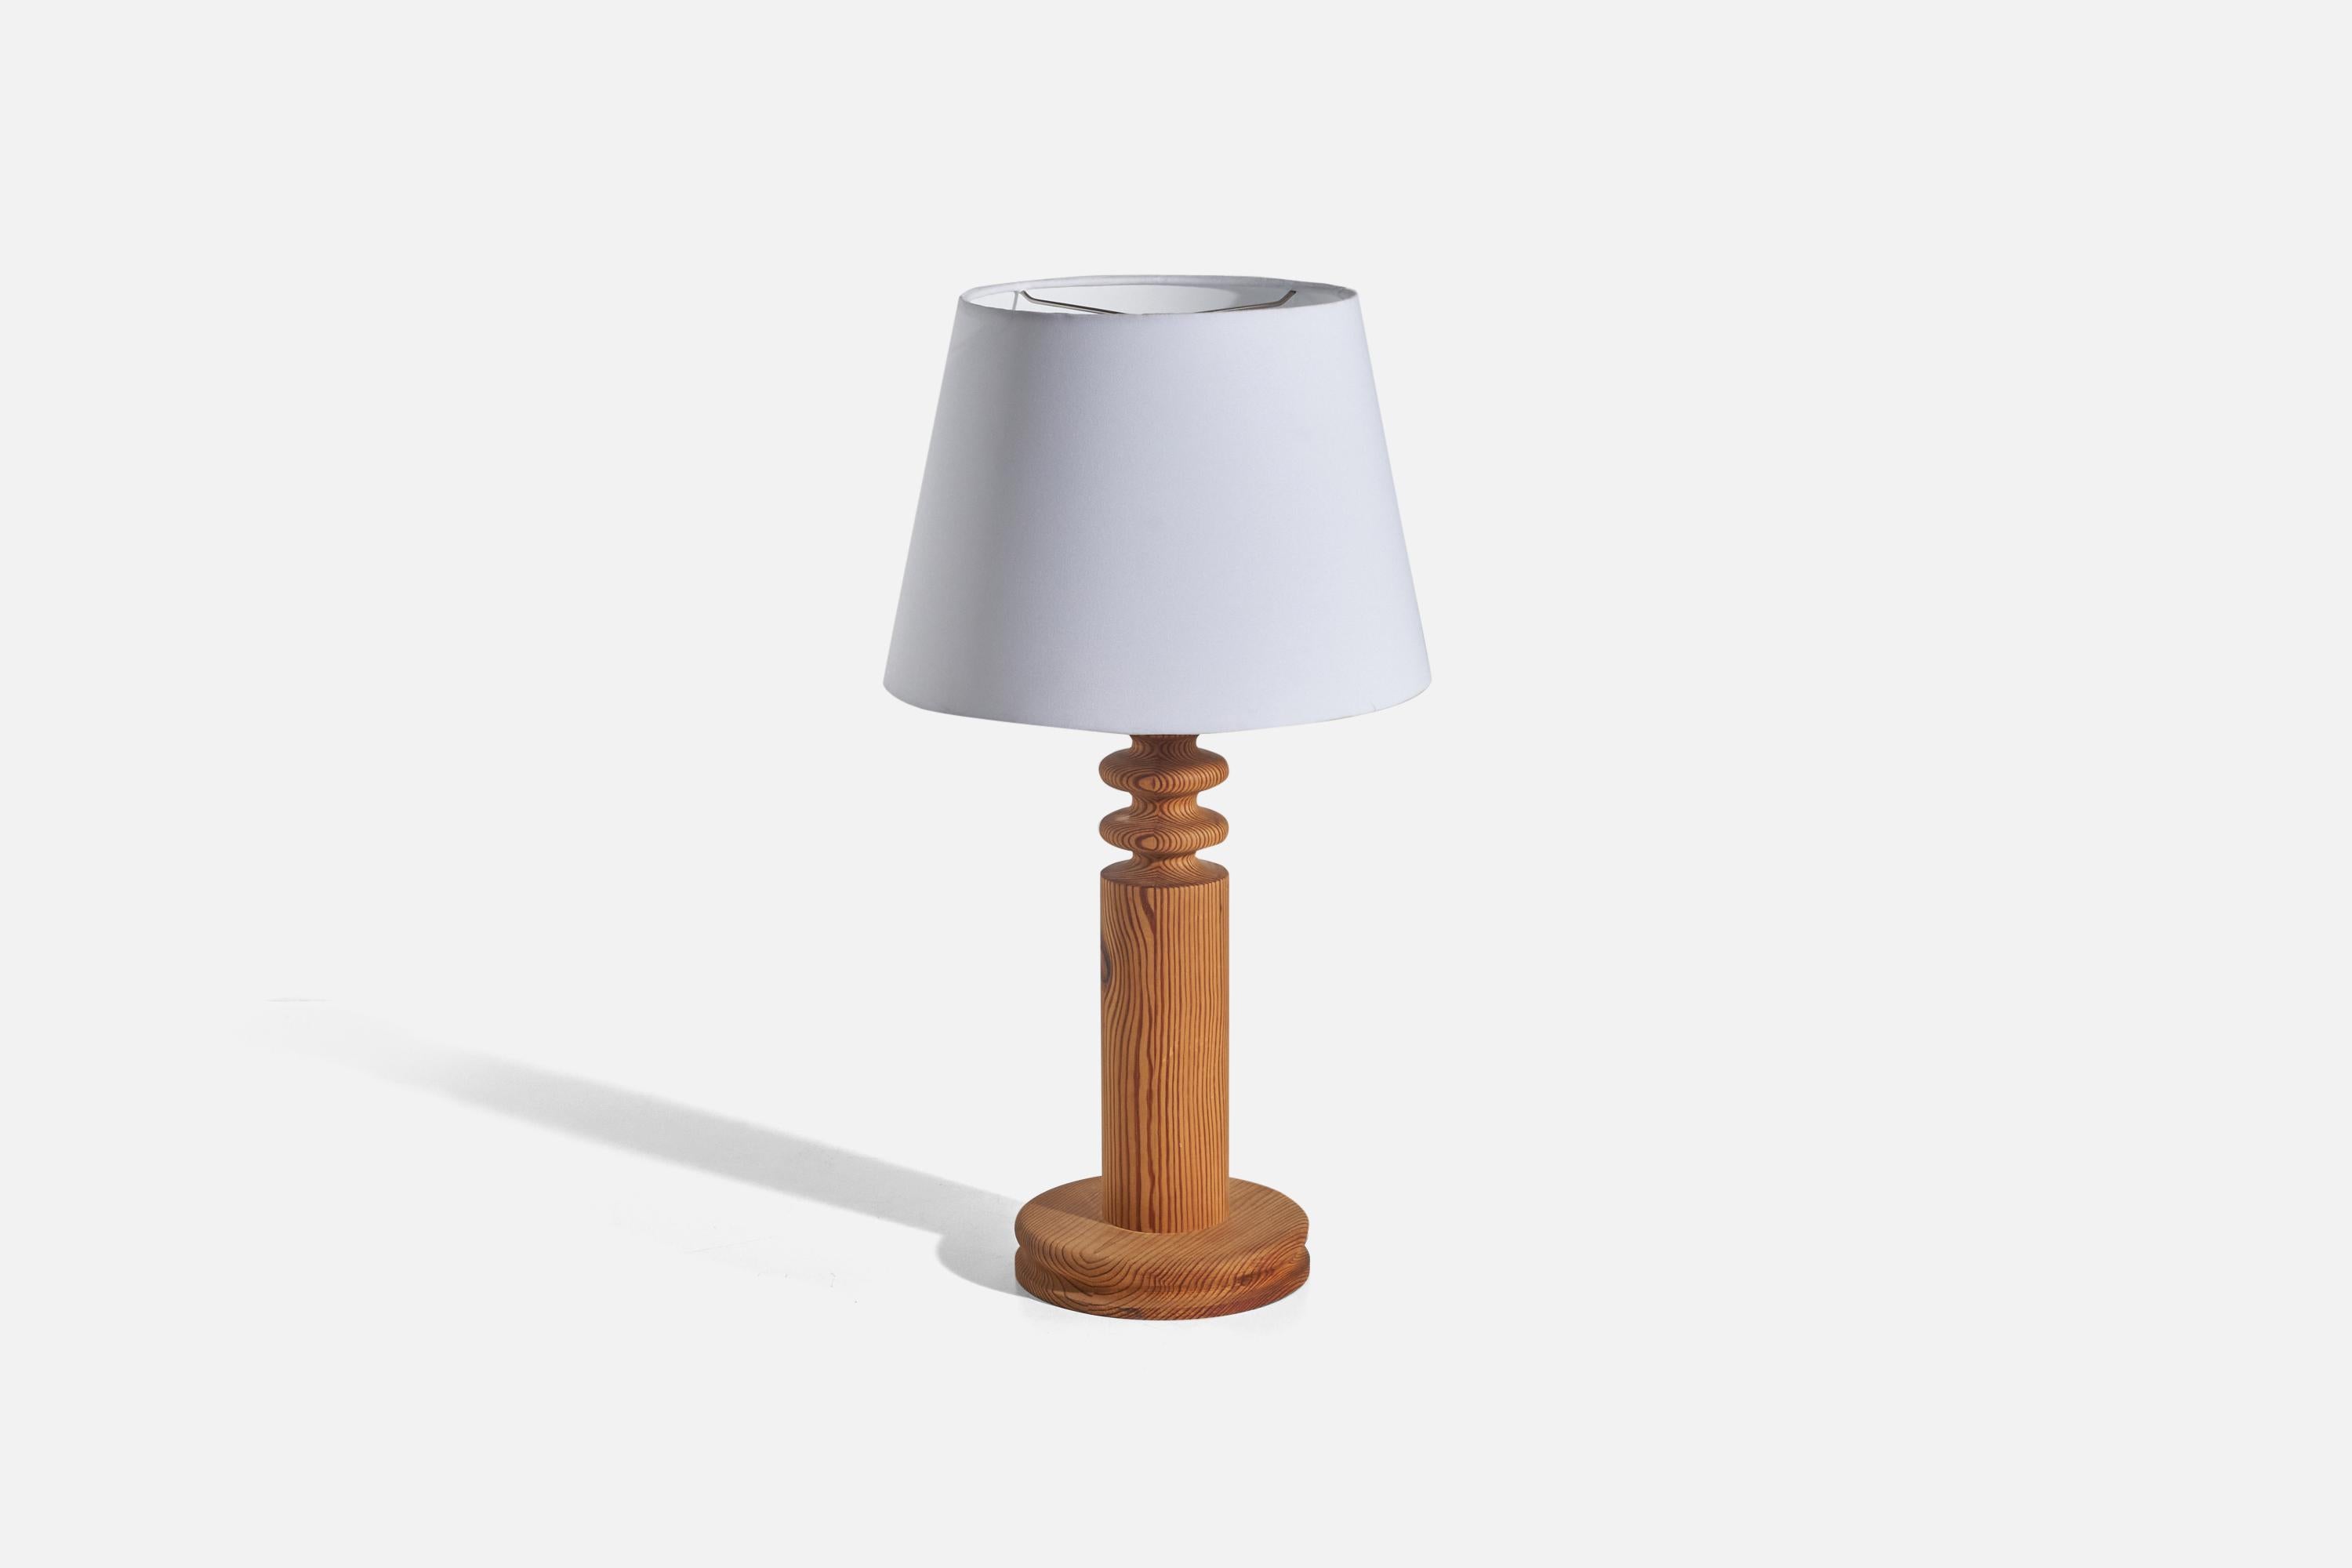 A solid pine table lamp designed by Uno Kristiansson and produced by Luxus, Sweden, 1960s.

Sold without lampshade(s)
Dimensions of lamp (inches) : 19.5 x 7.81 x 7.81 (Height x Width x Depth)
Dimensions of shade (inches) : 10.12 x 14 x 10.25